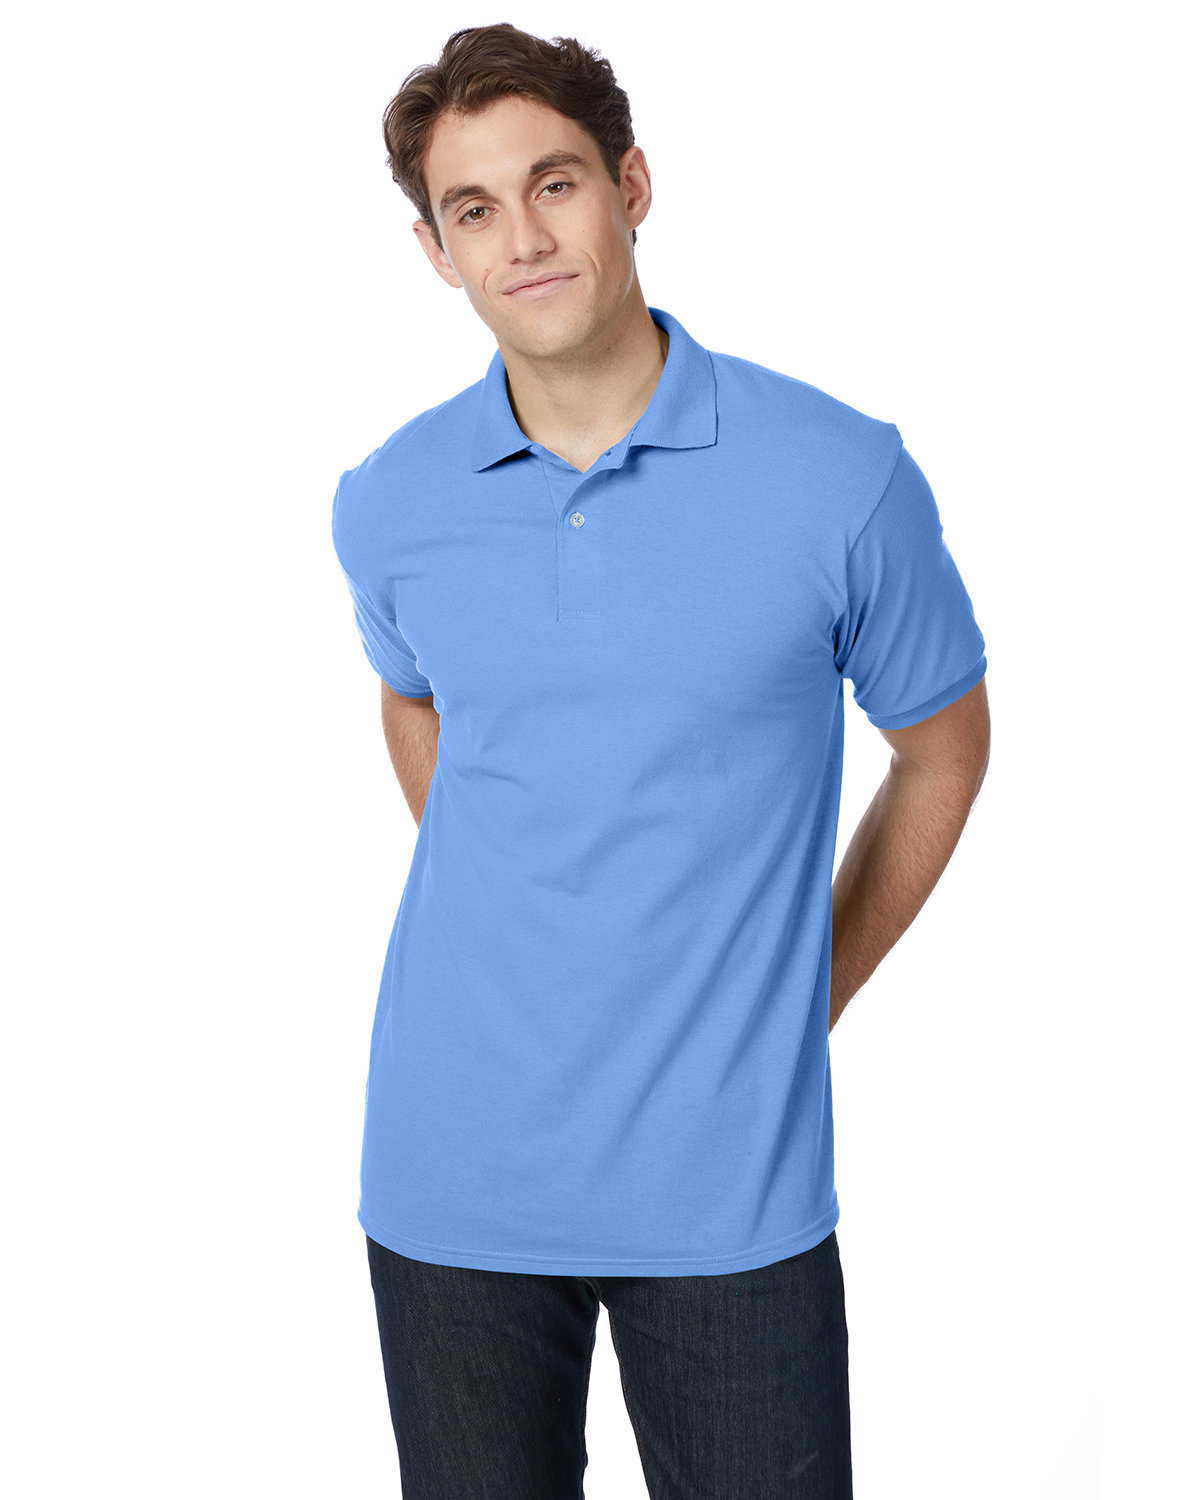 Polo Knit | alphabroder EcoSmart® 50/50 Jersey Adult Hanes